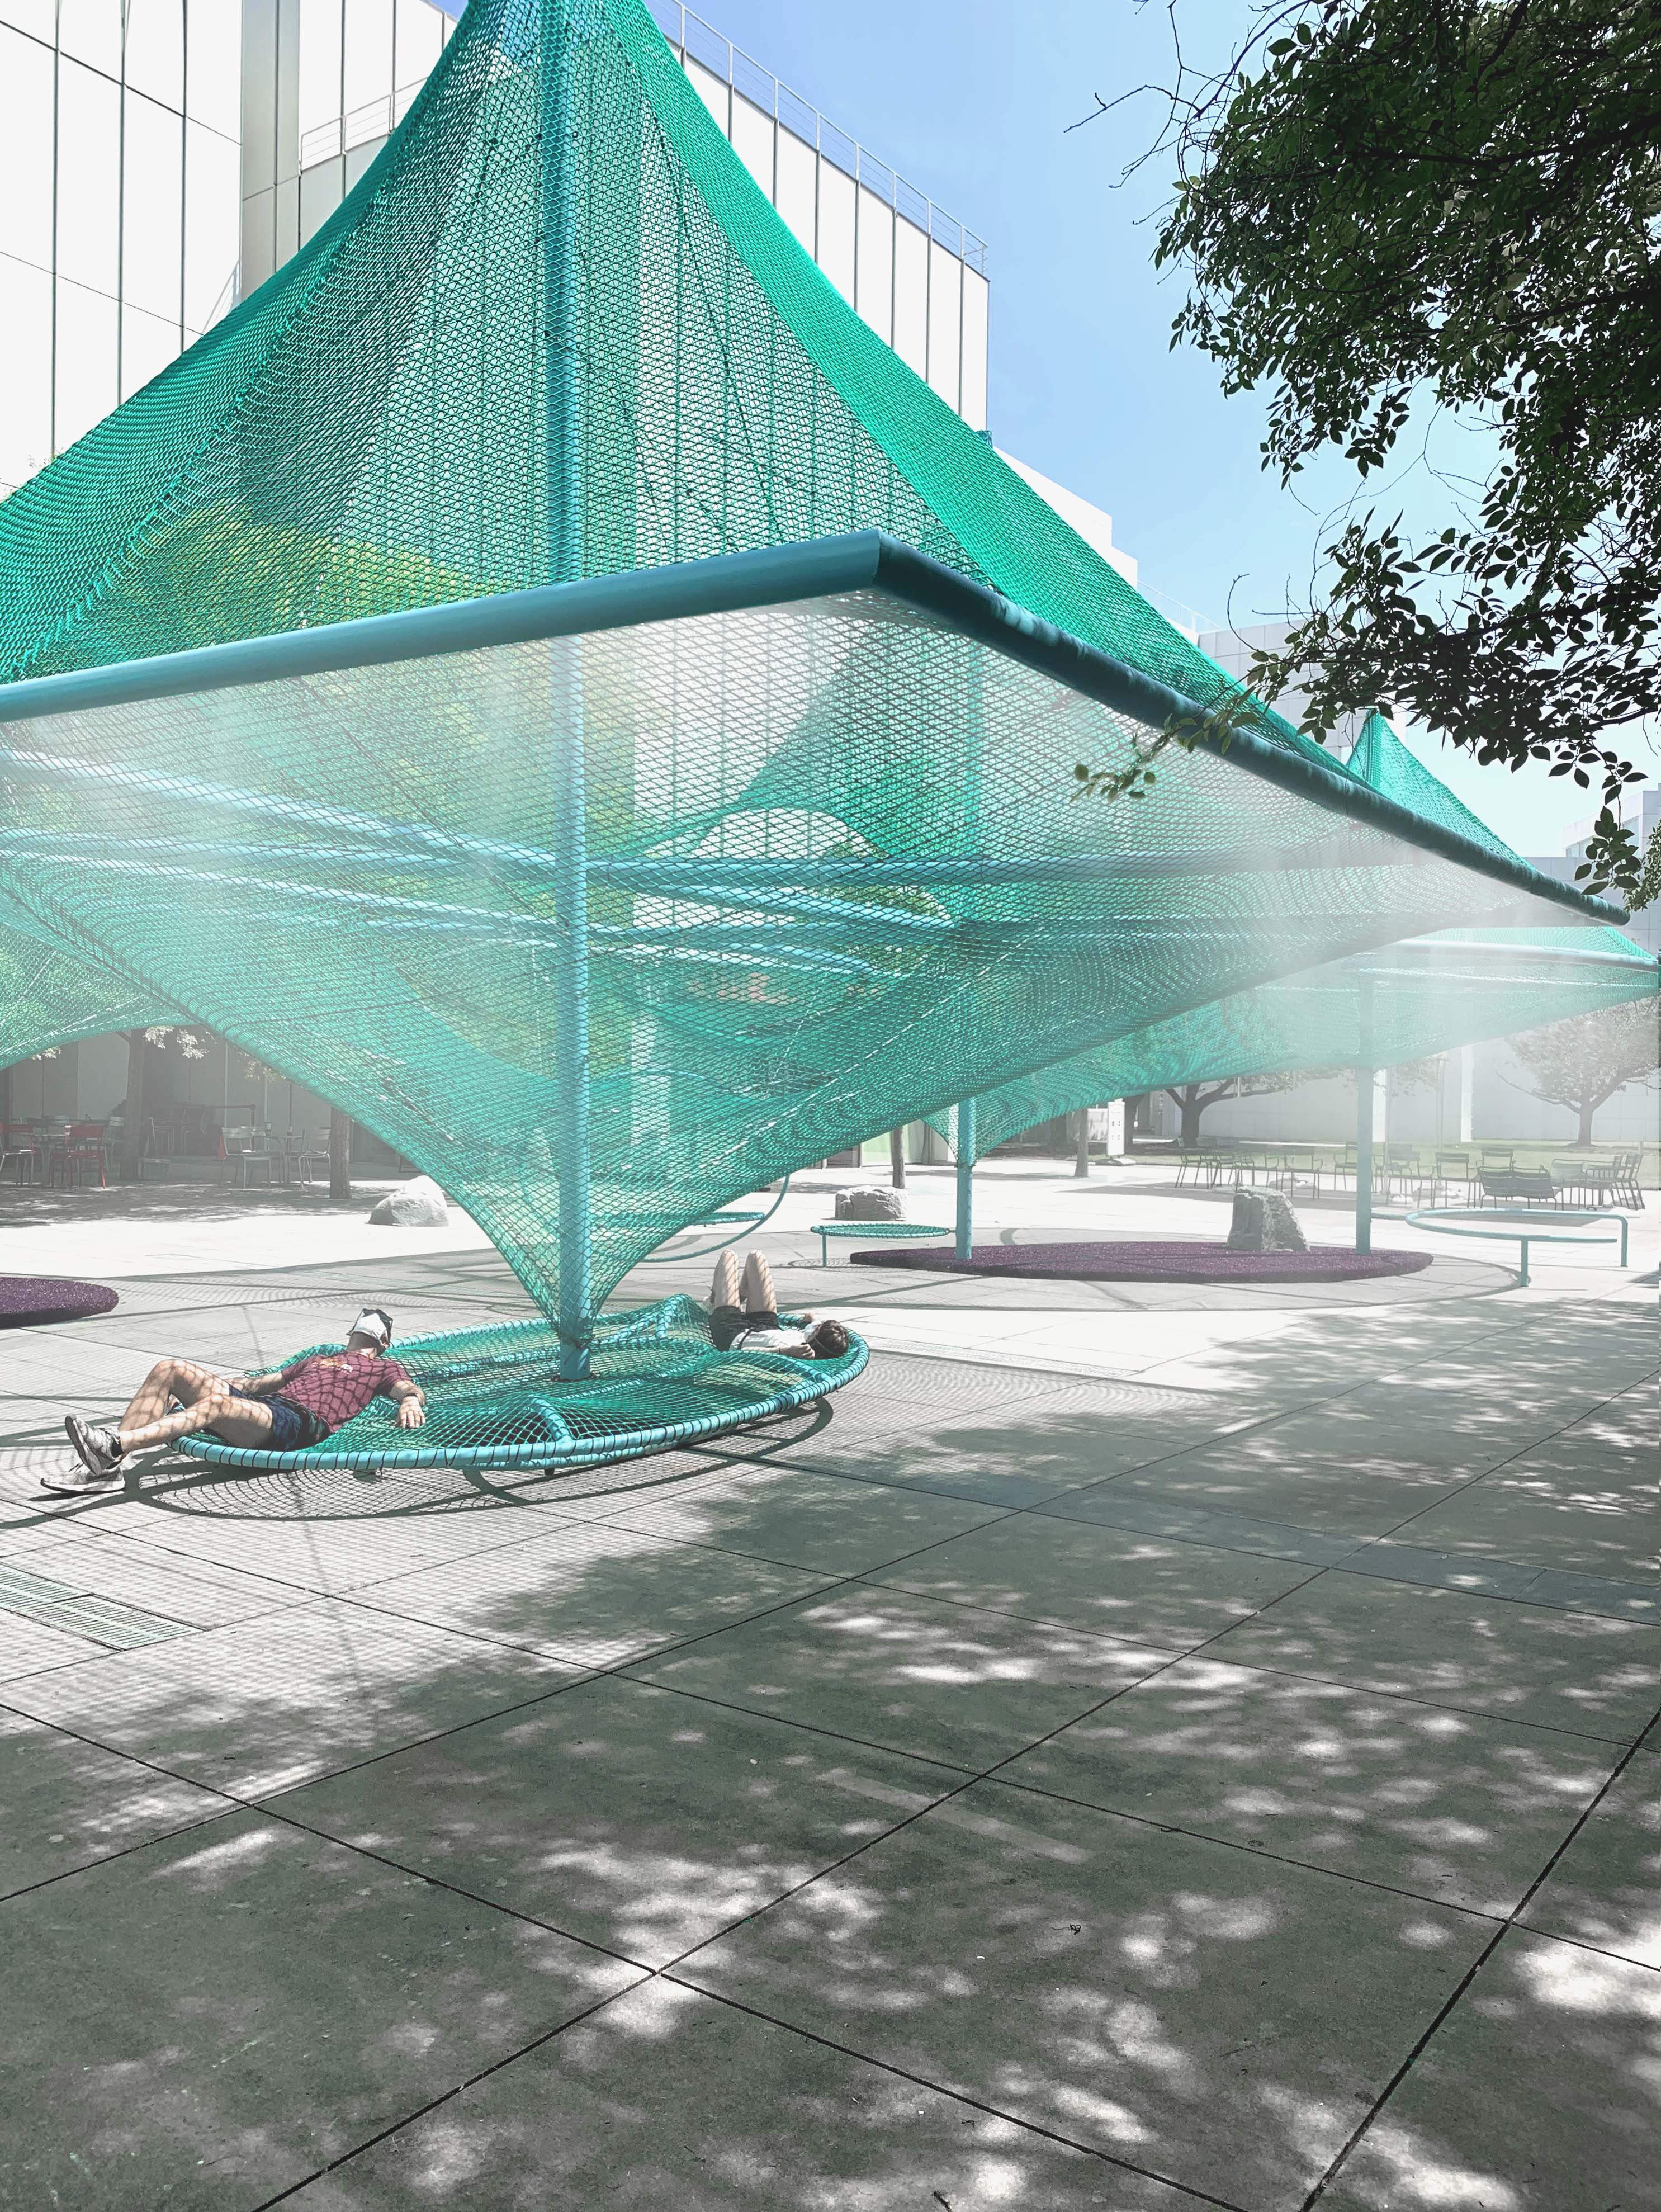 Visitors can sit, lie down, and relax under the canopy